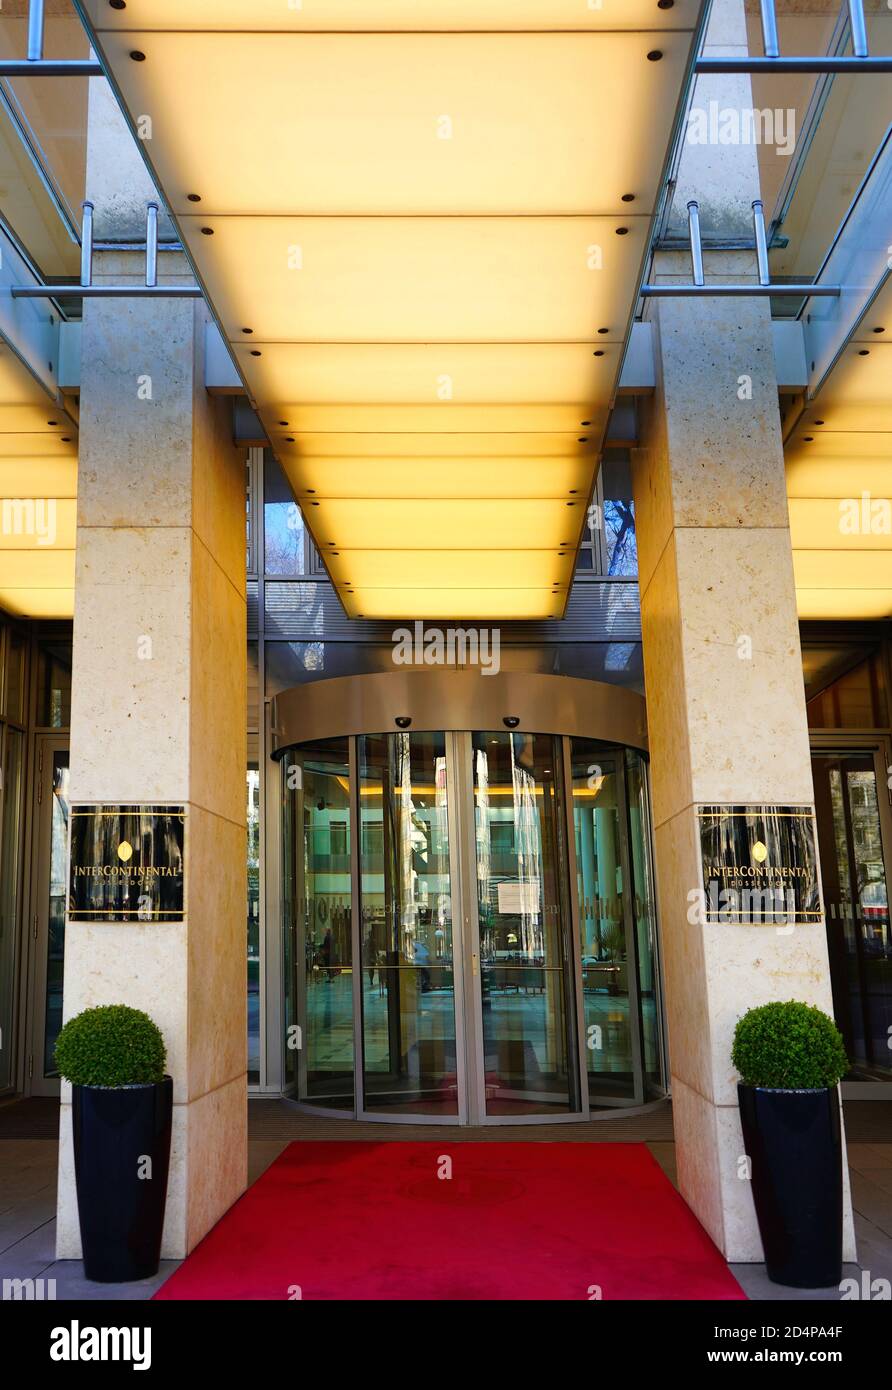 The entrance of the 5 star hotel Intercontinental on Königsallee in Düsseldorf, one of the leading business hotels in town. Stock Photo